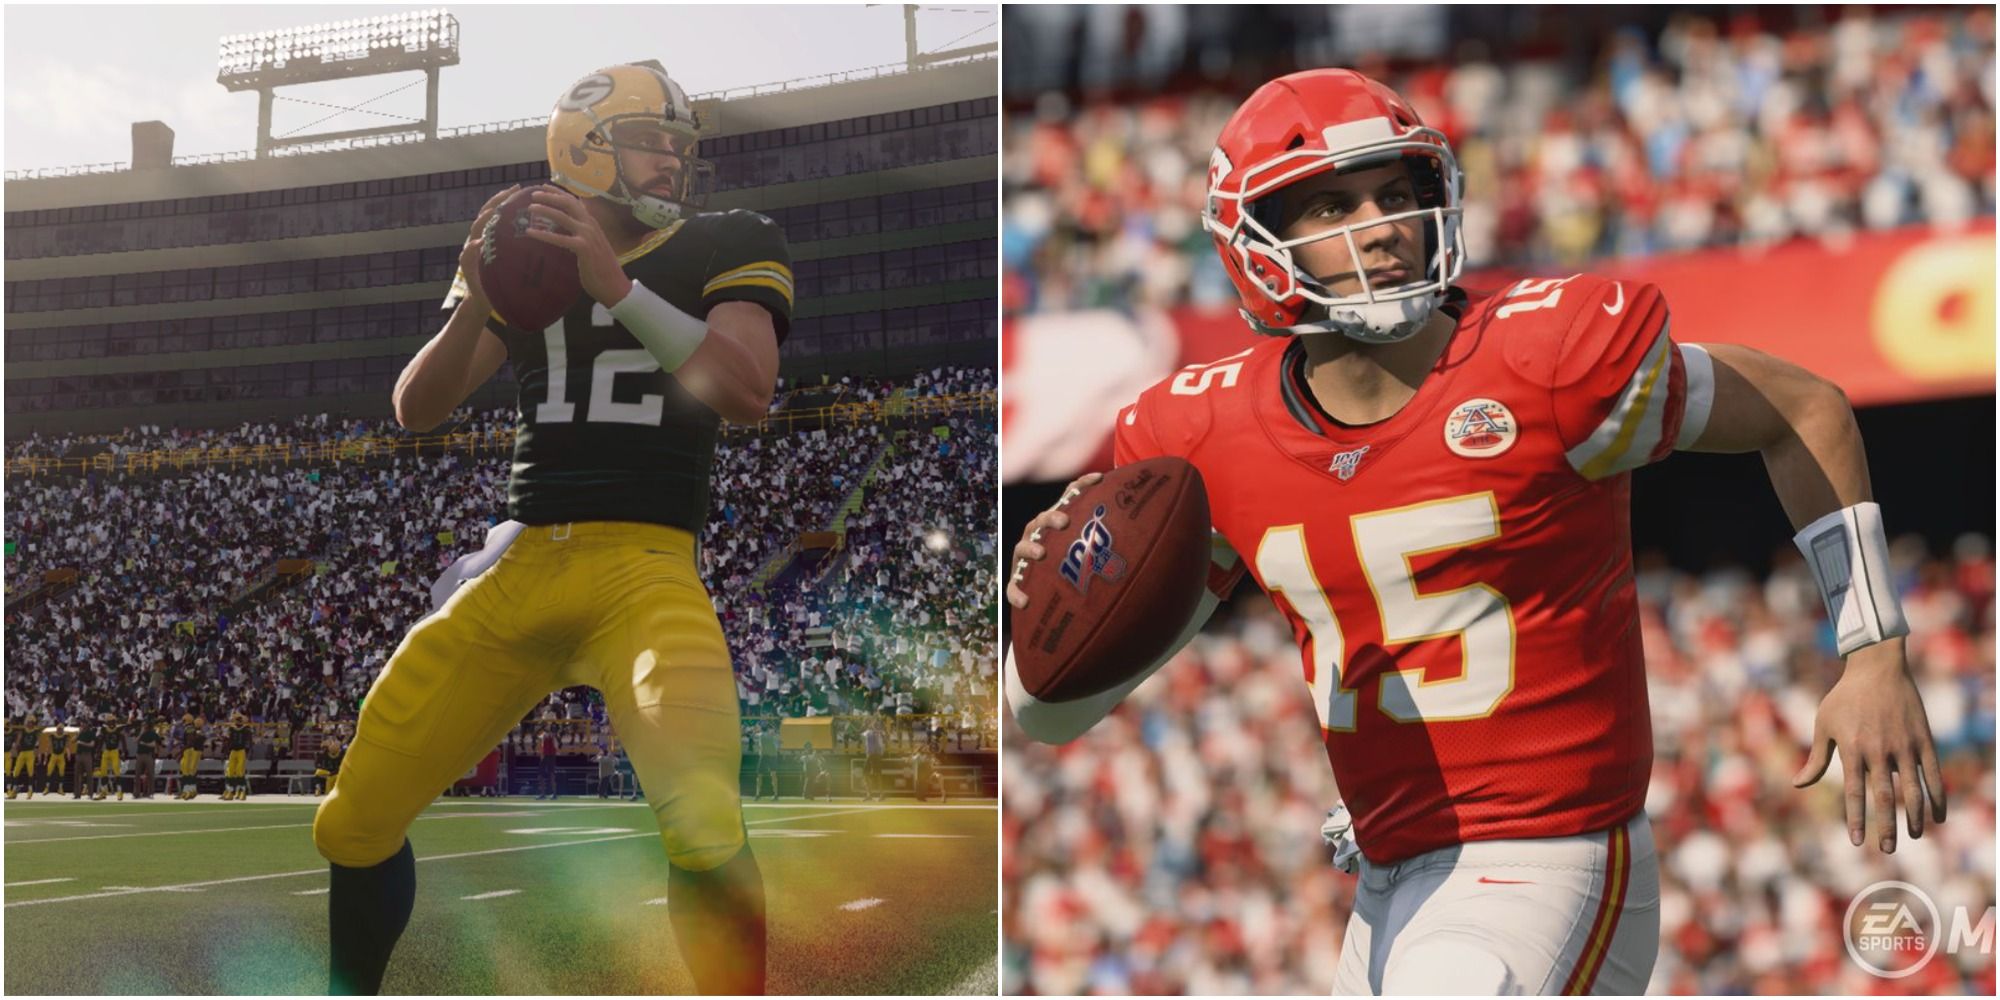 madden nfl 22 player ratings